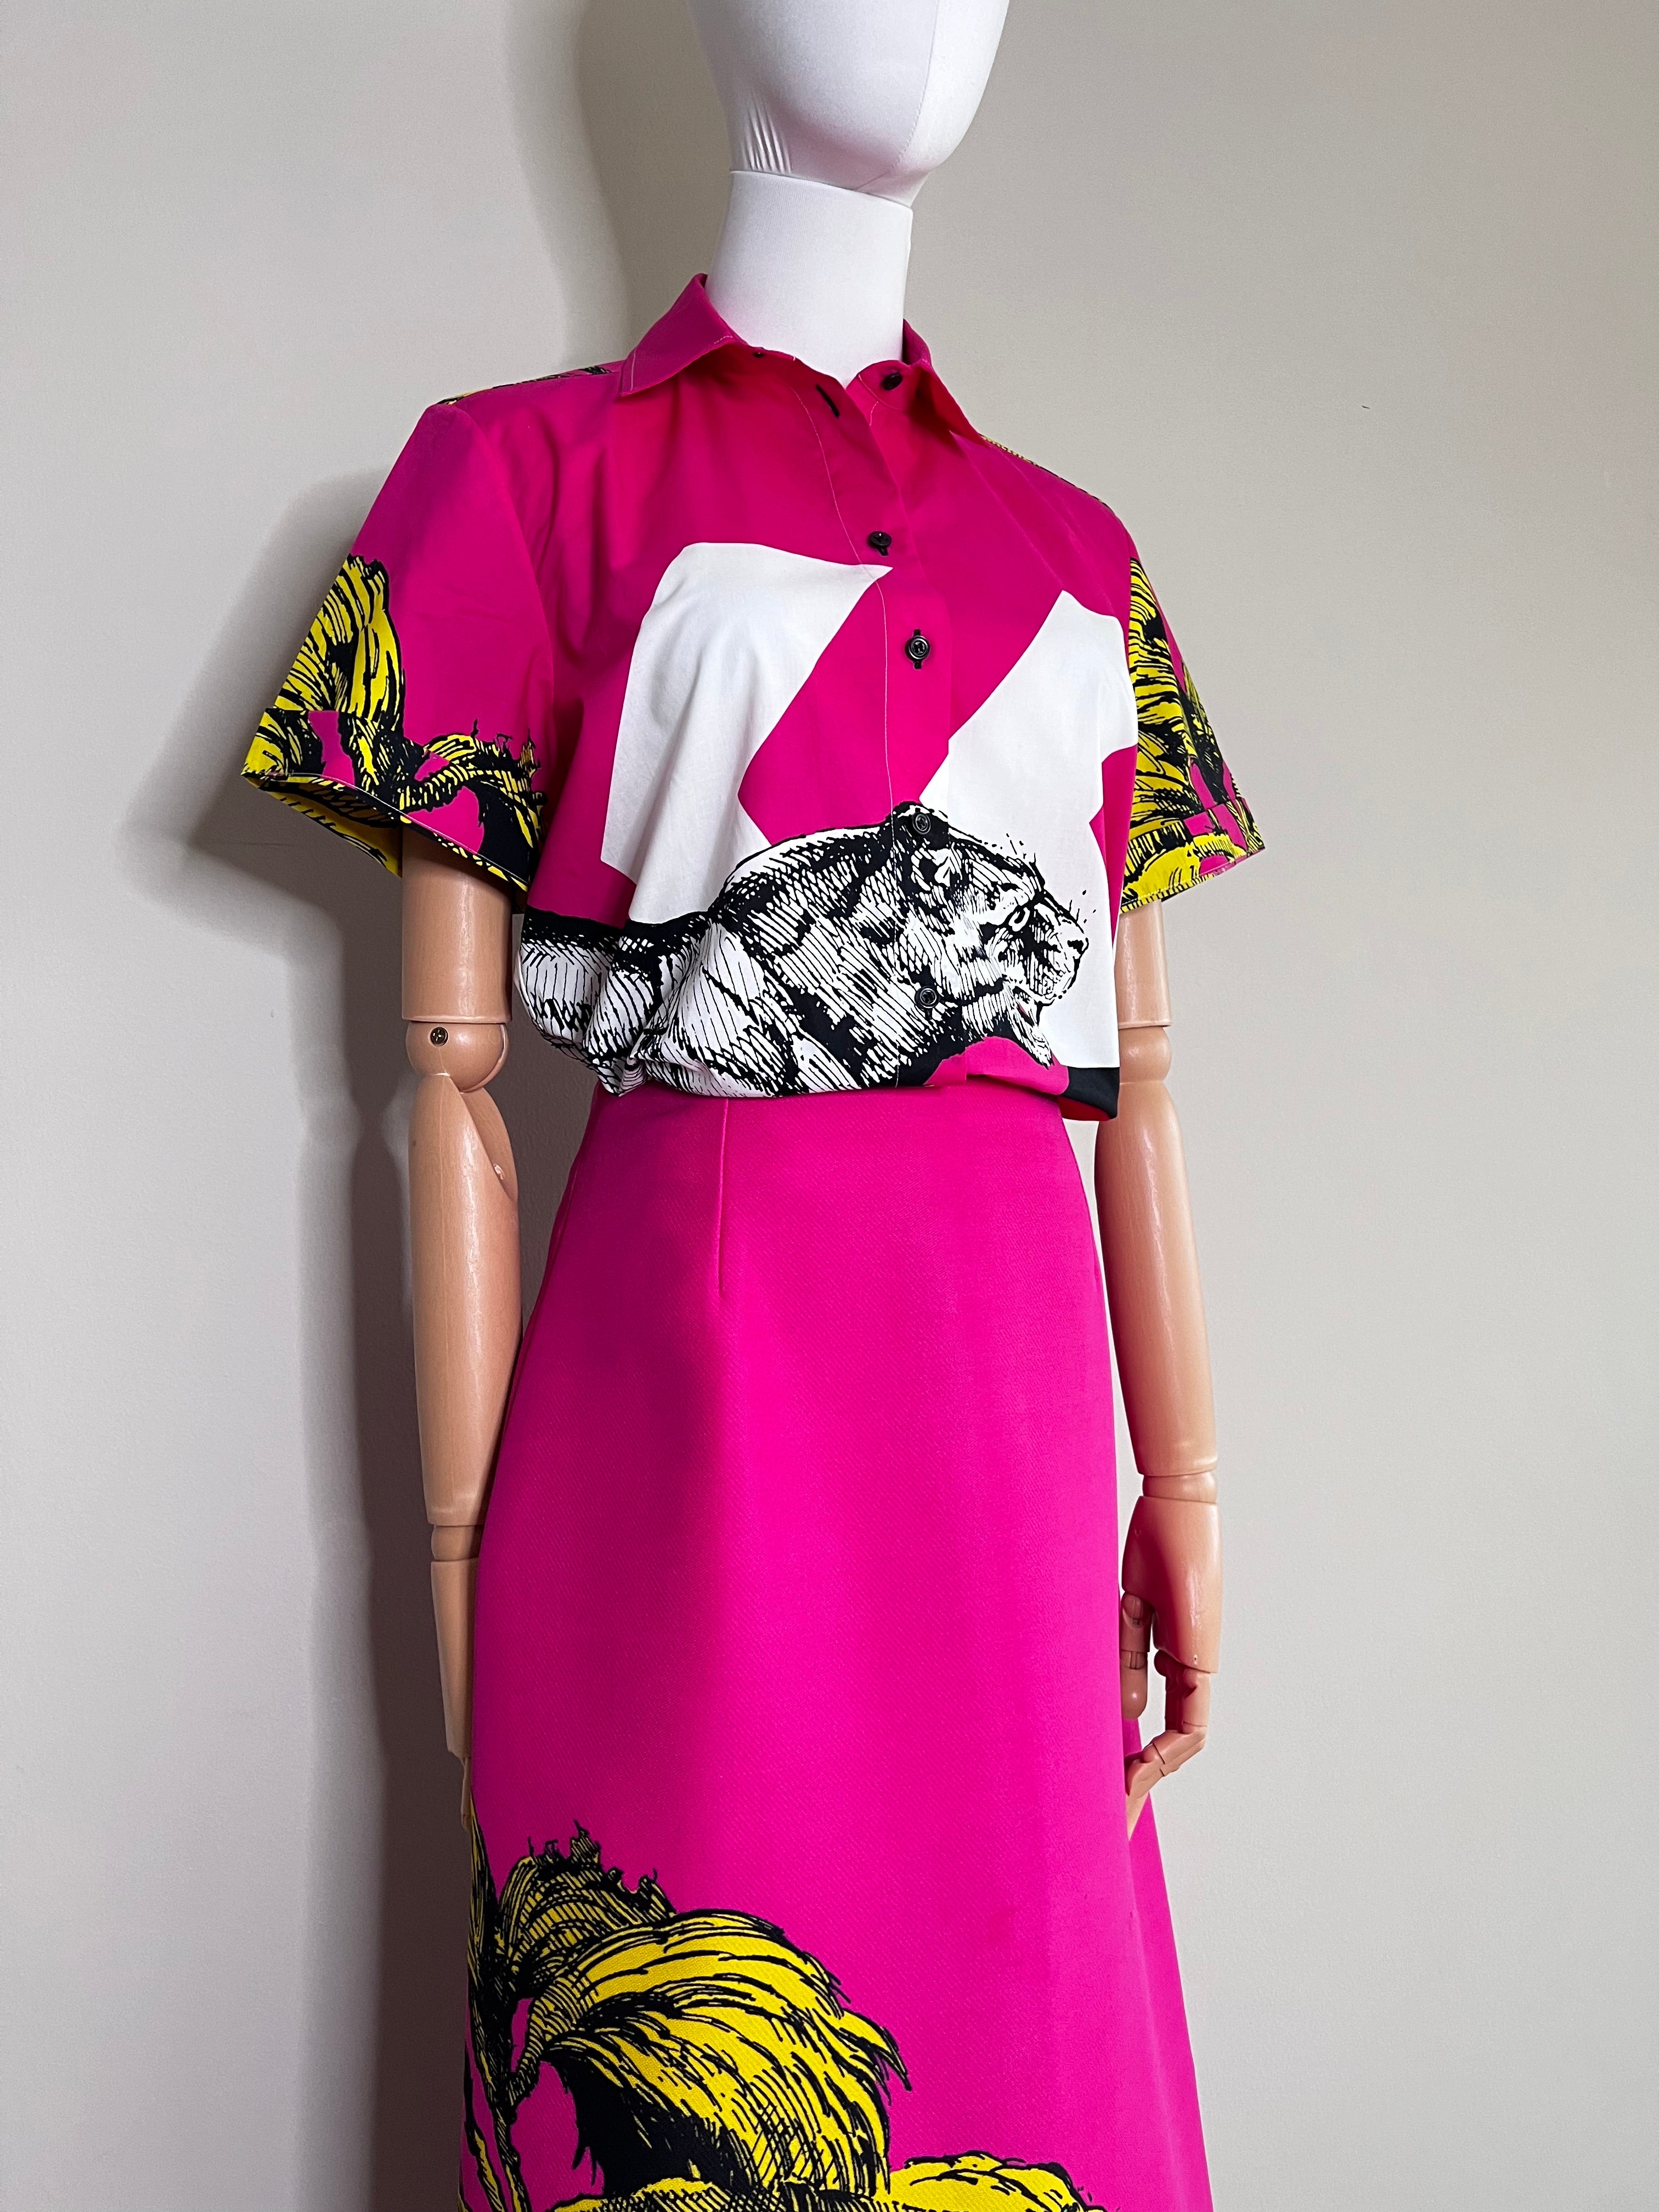 A set of Short-Sleeved Blouse & midi Skirt Pink Cotton Poplin with Multicolor D-Tiger Pop Motif - CHRISTIAN DIOR